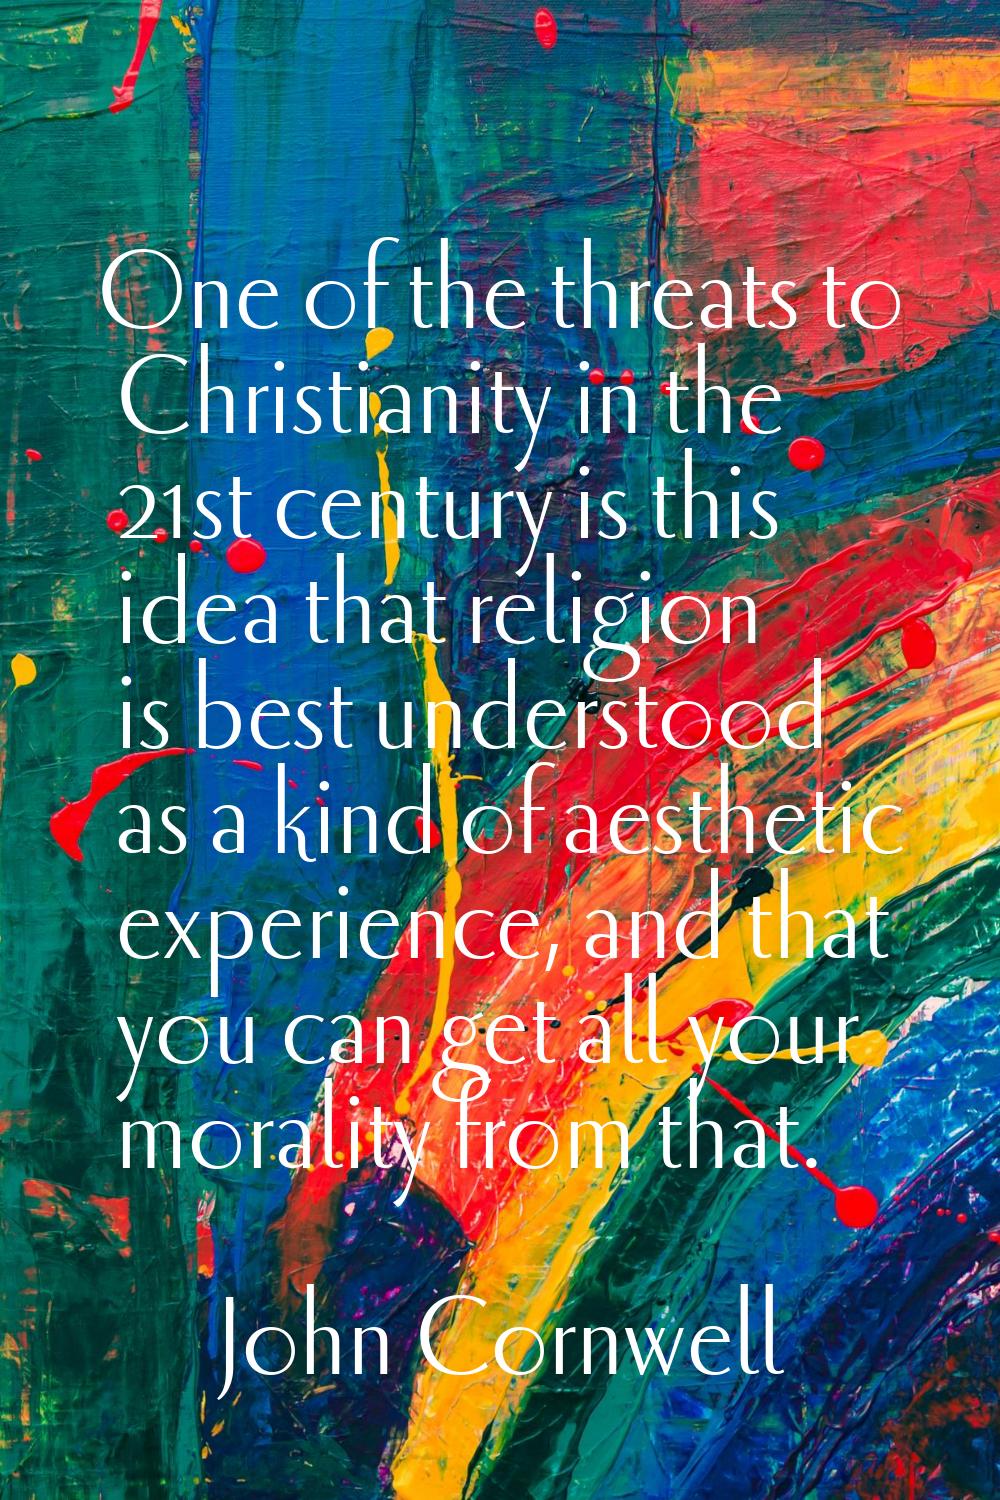 One of the threats to Christianity in the 21st century is this idea that religion is best understoo